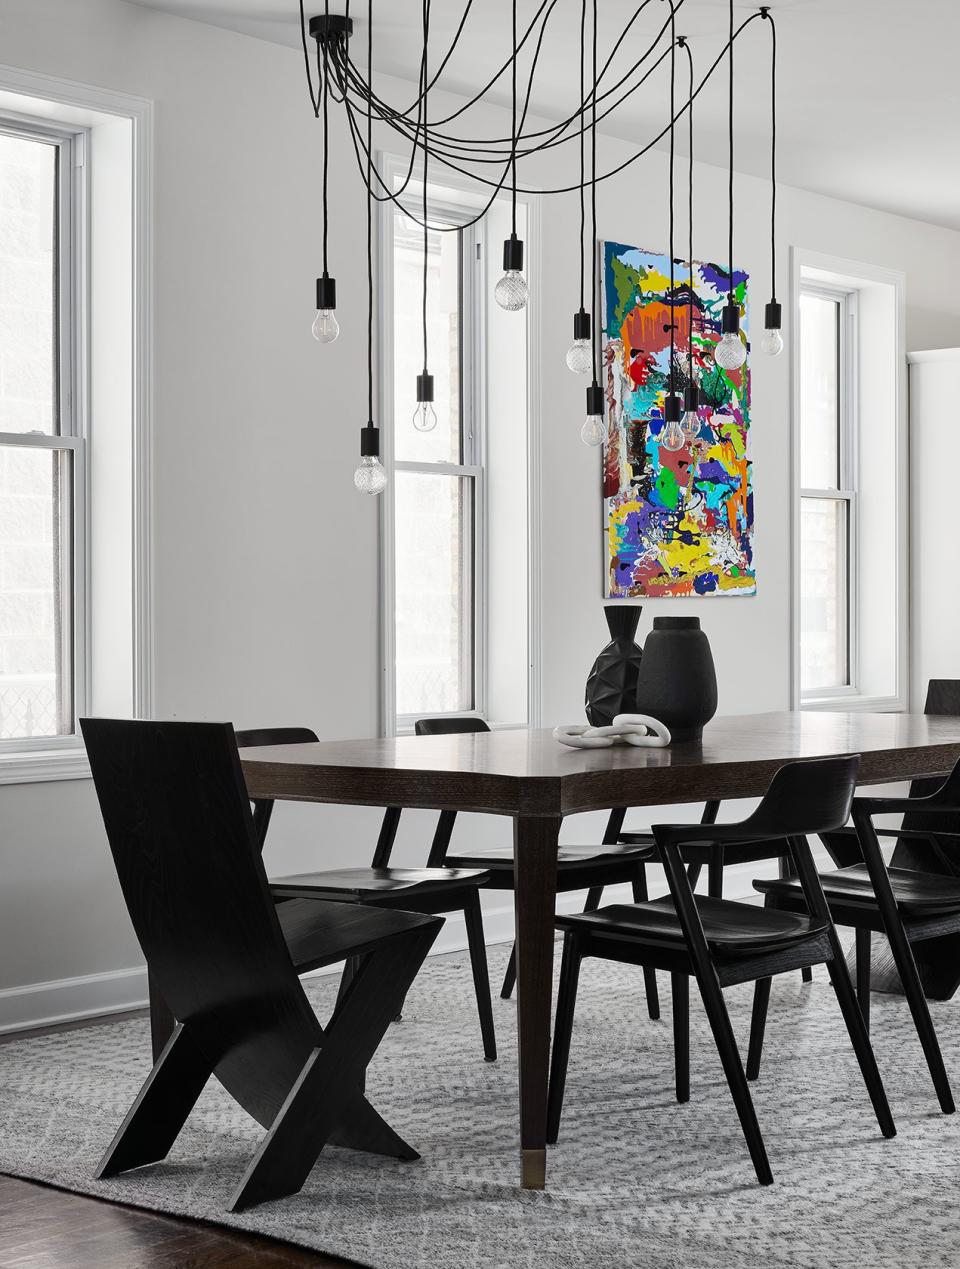 In this black-and-white dining room, Paula Interiors added a brightly colored artwork for contrast.